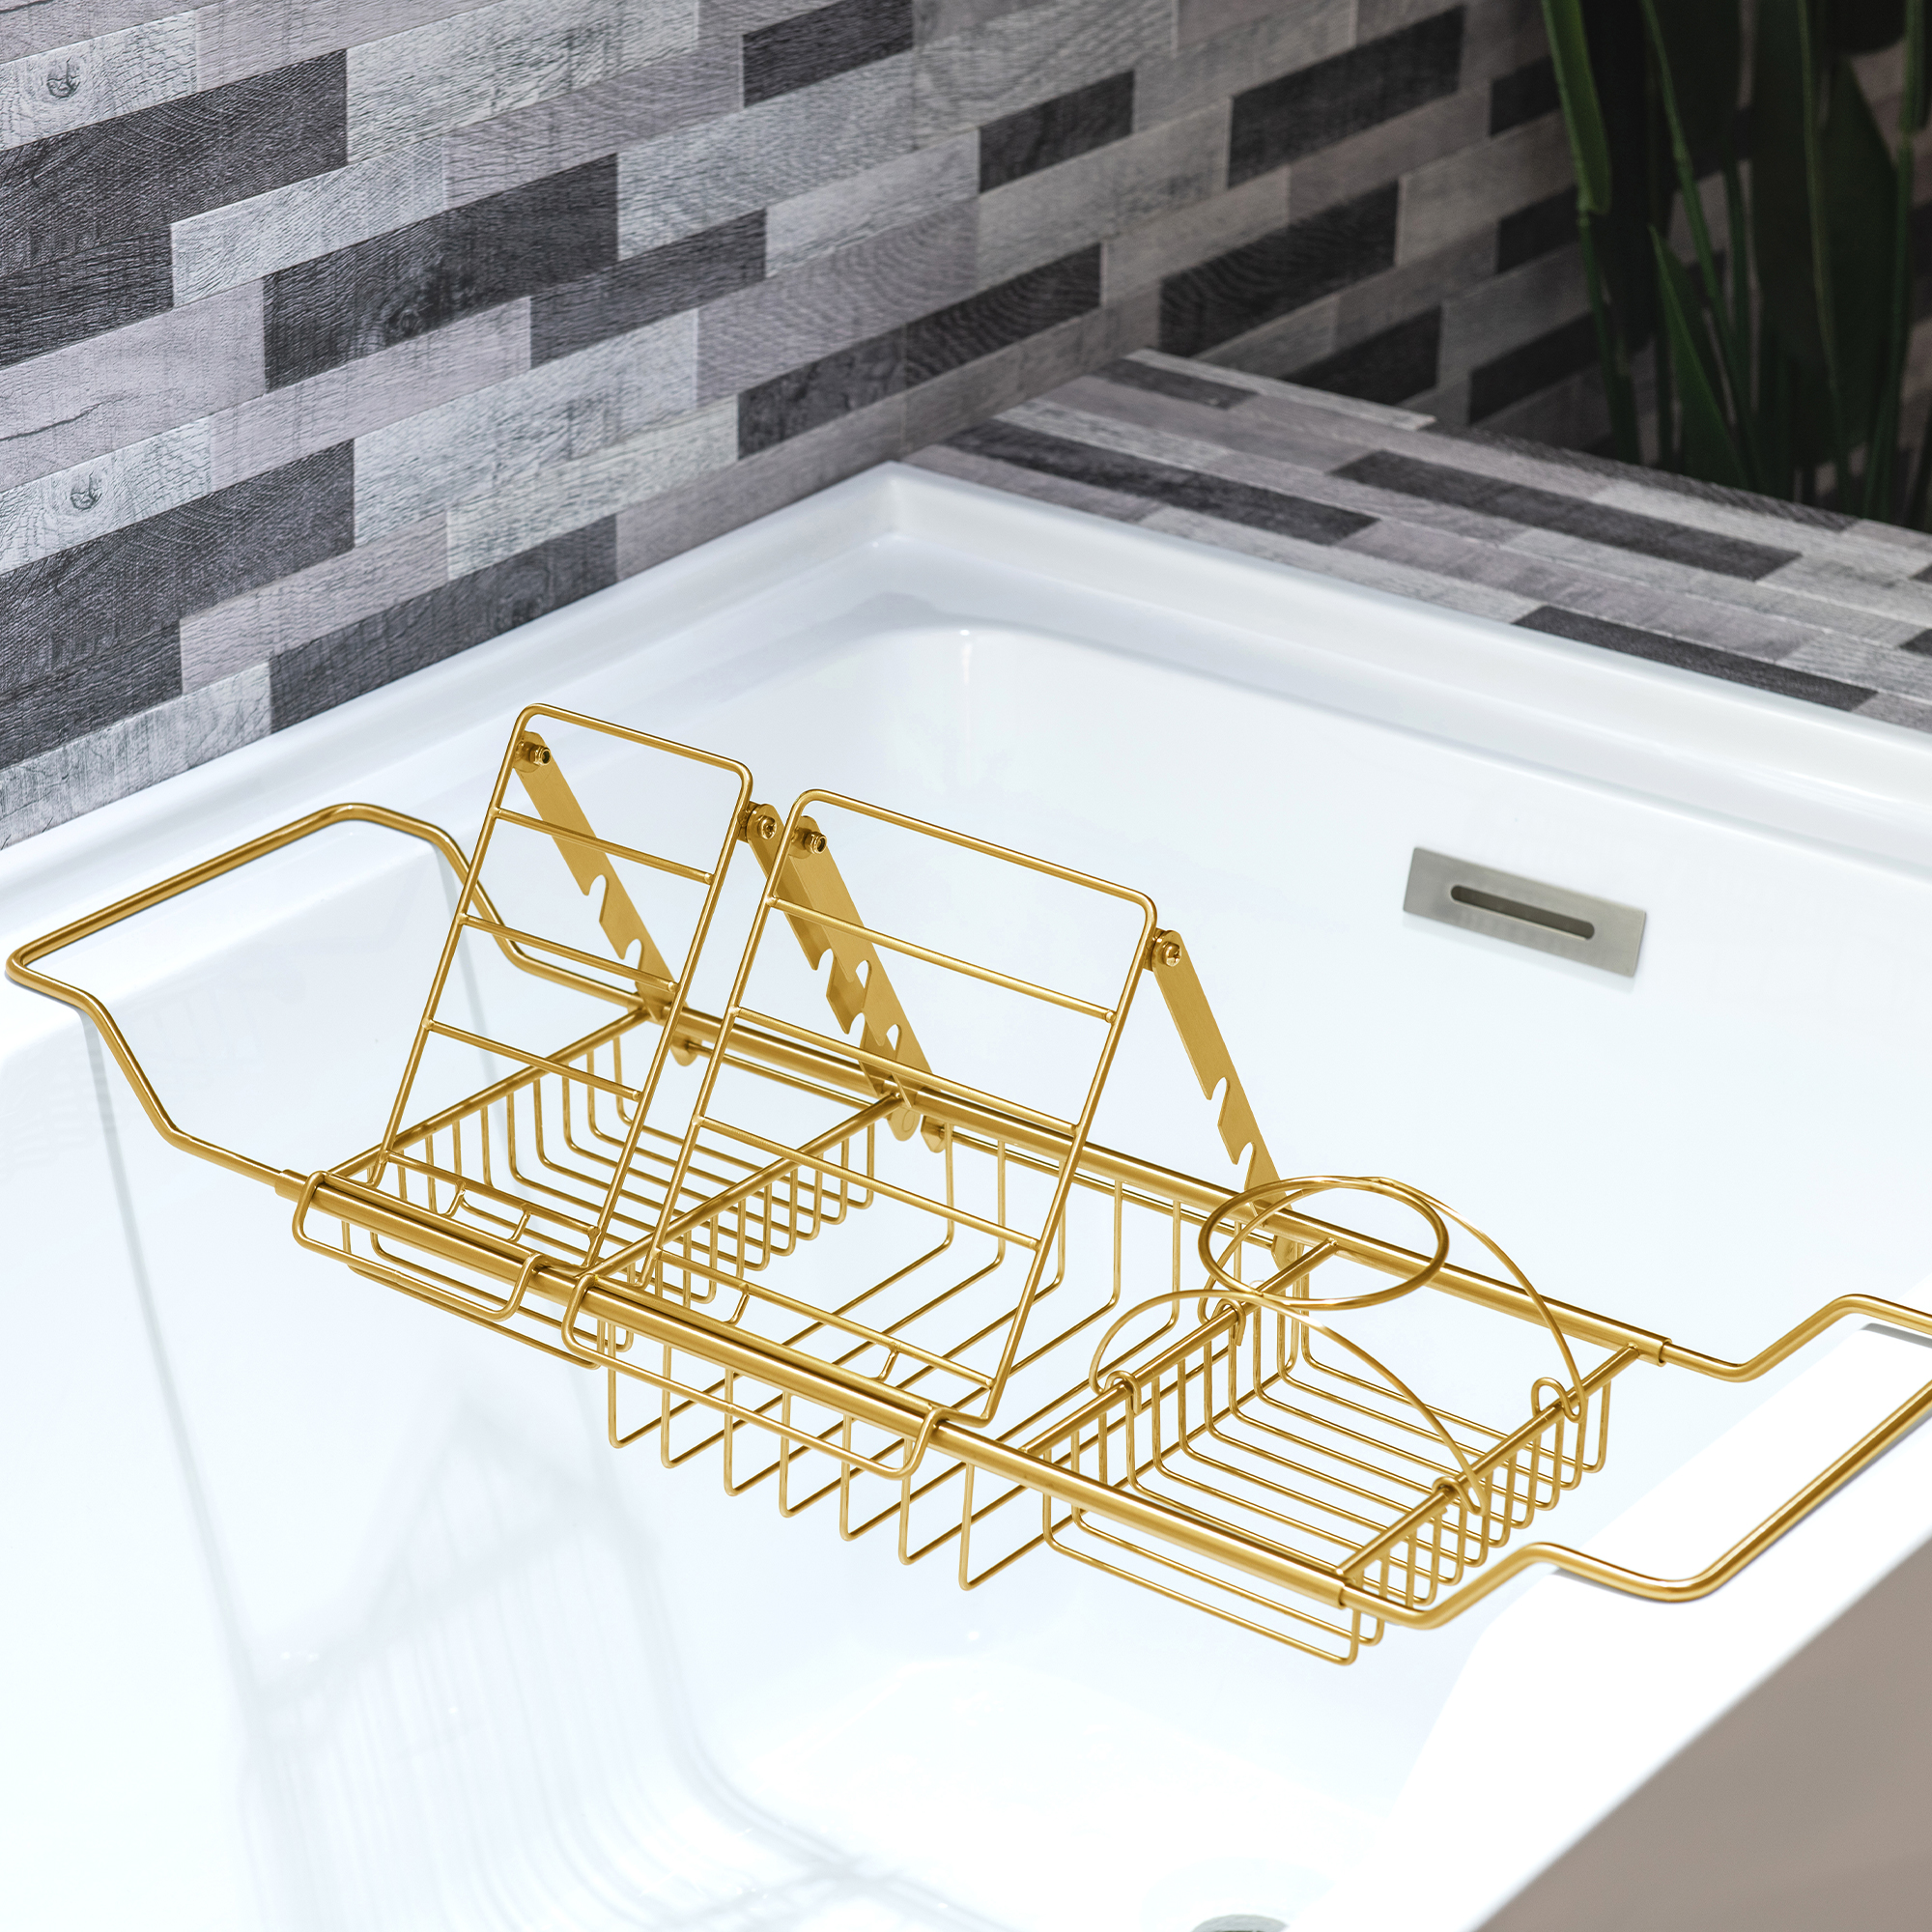  WOODBRIDGE Stainless Steel Extendable Bathtub Caddy Tray in Brushed Gold Finish with Removable Wine Holder, Book and Phone Rack, Bathcad-BG_14311